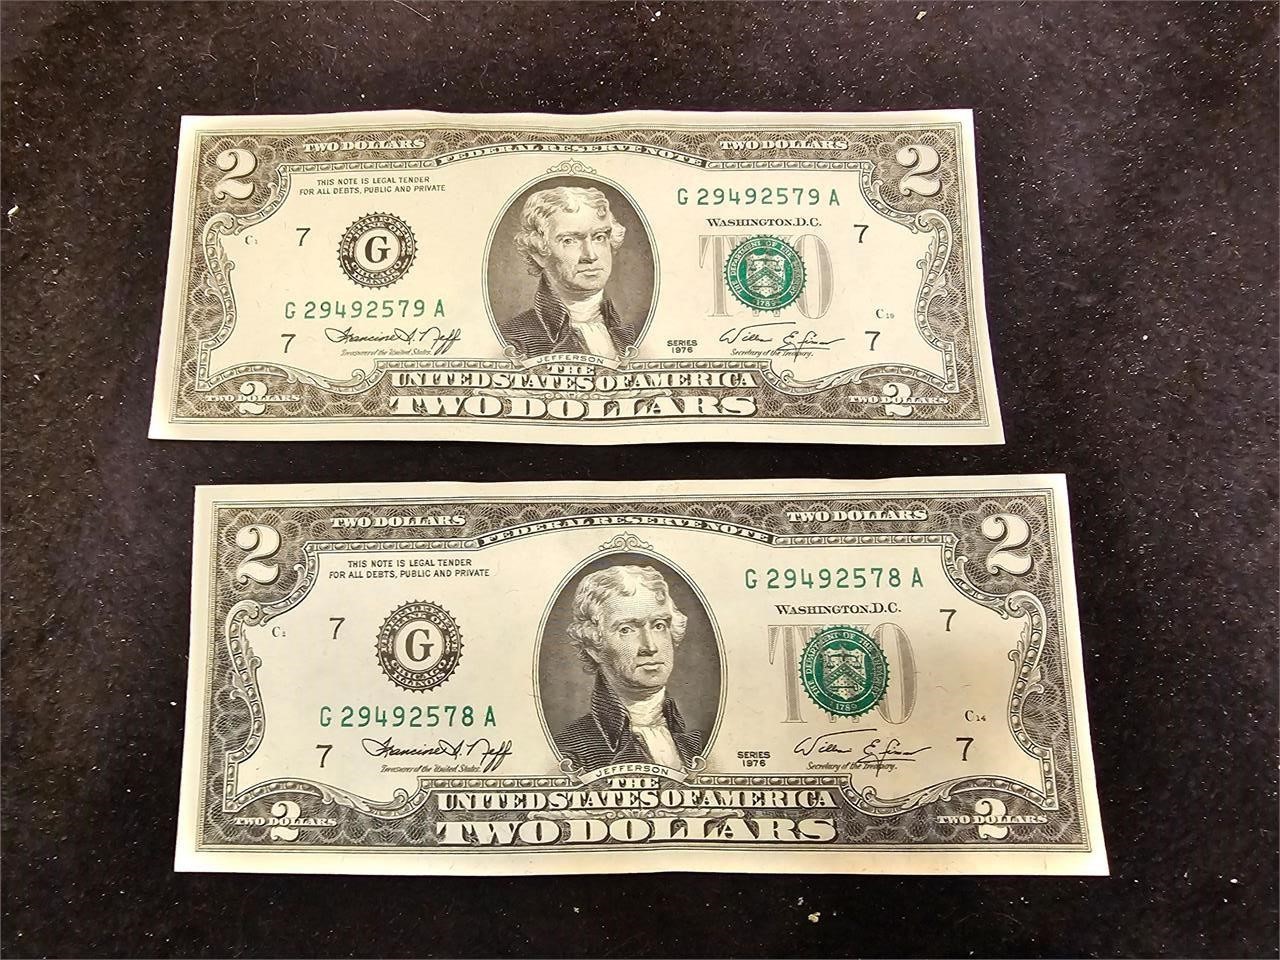 TWO $2.00 BILLS - CONSECUTIVE SERIAL NUMBERS